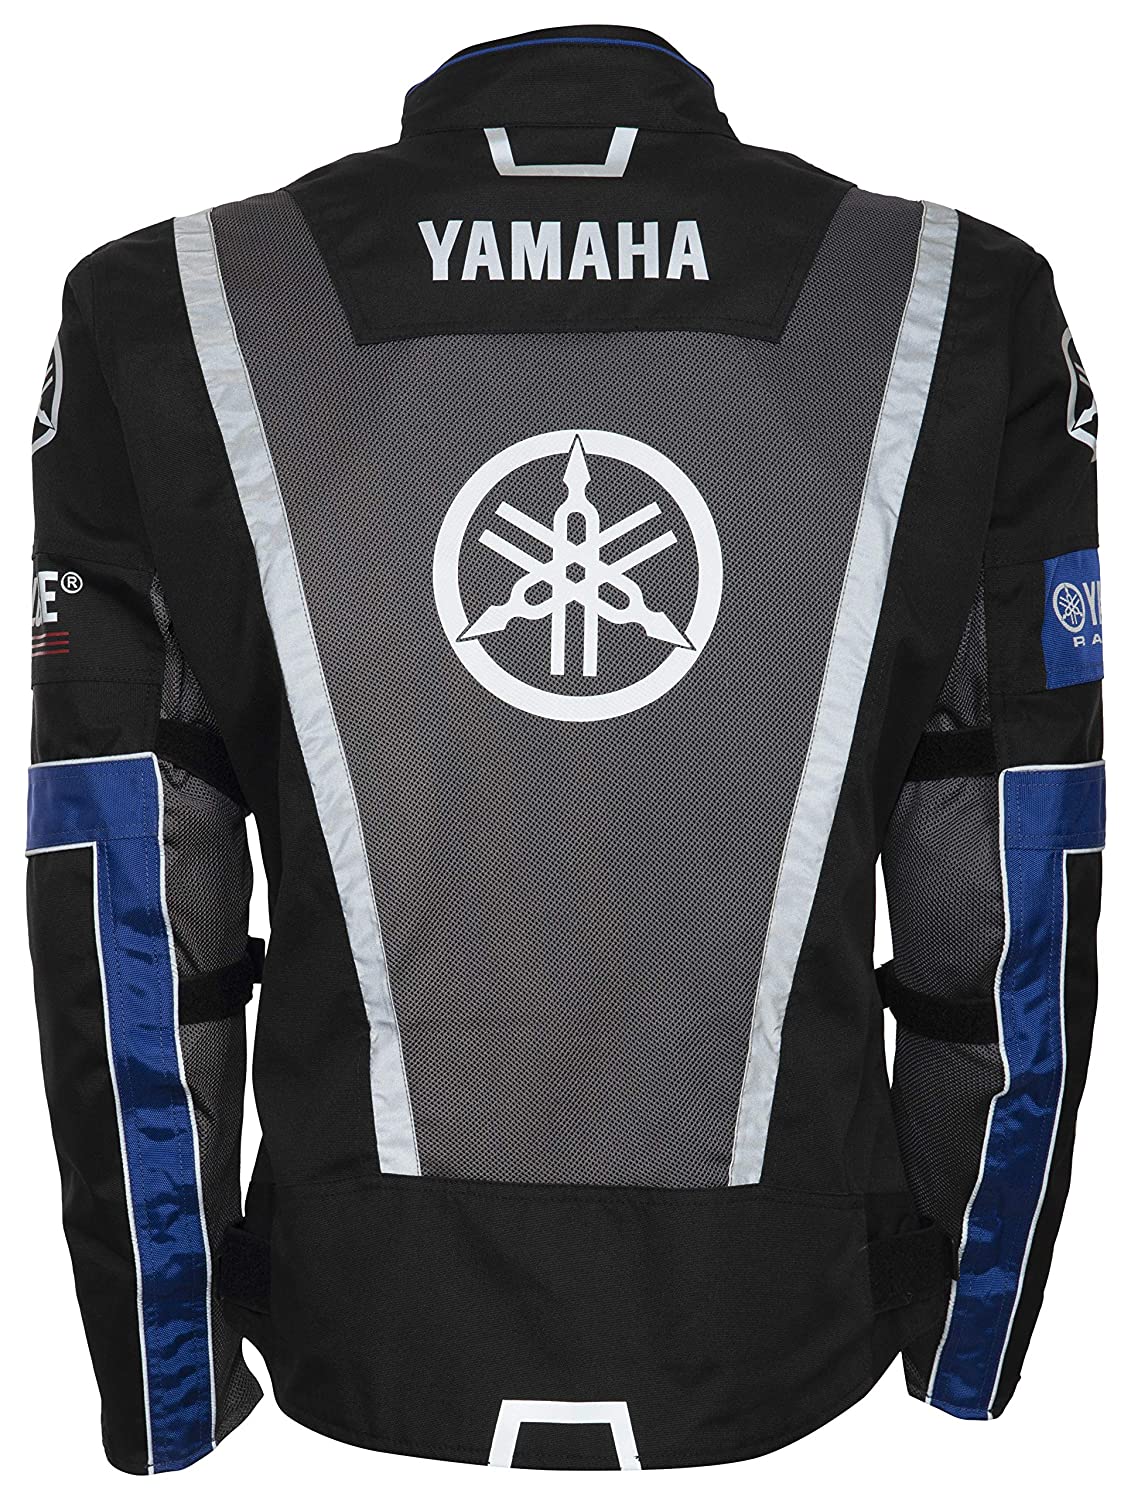 Yamaha apparel & accessories for Indian bikers now available on Amazon ...